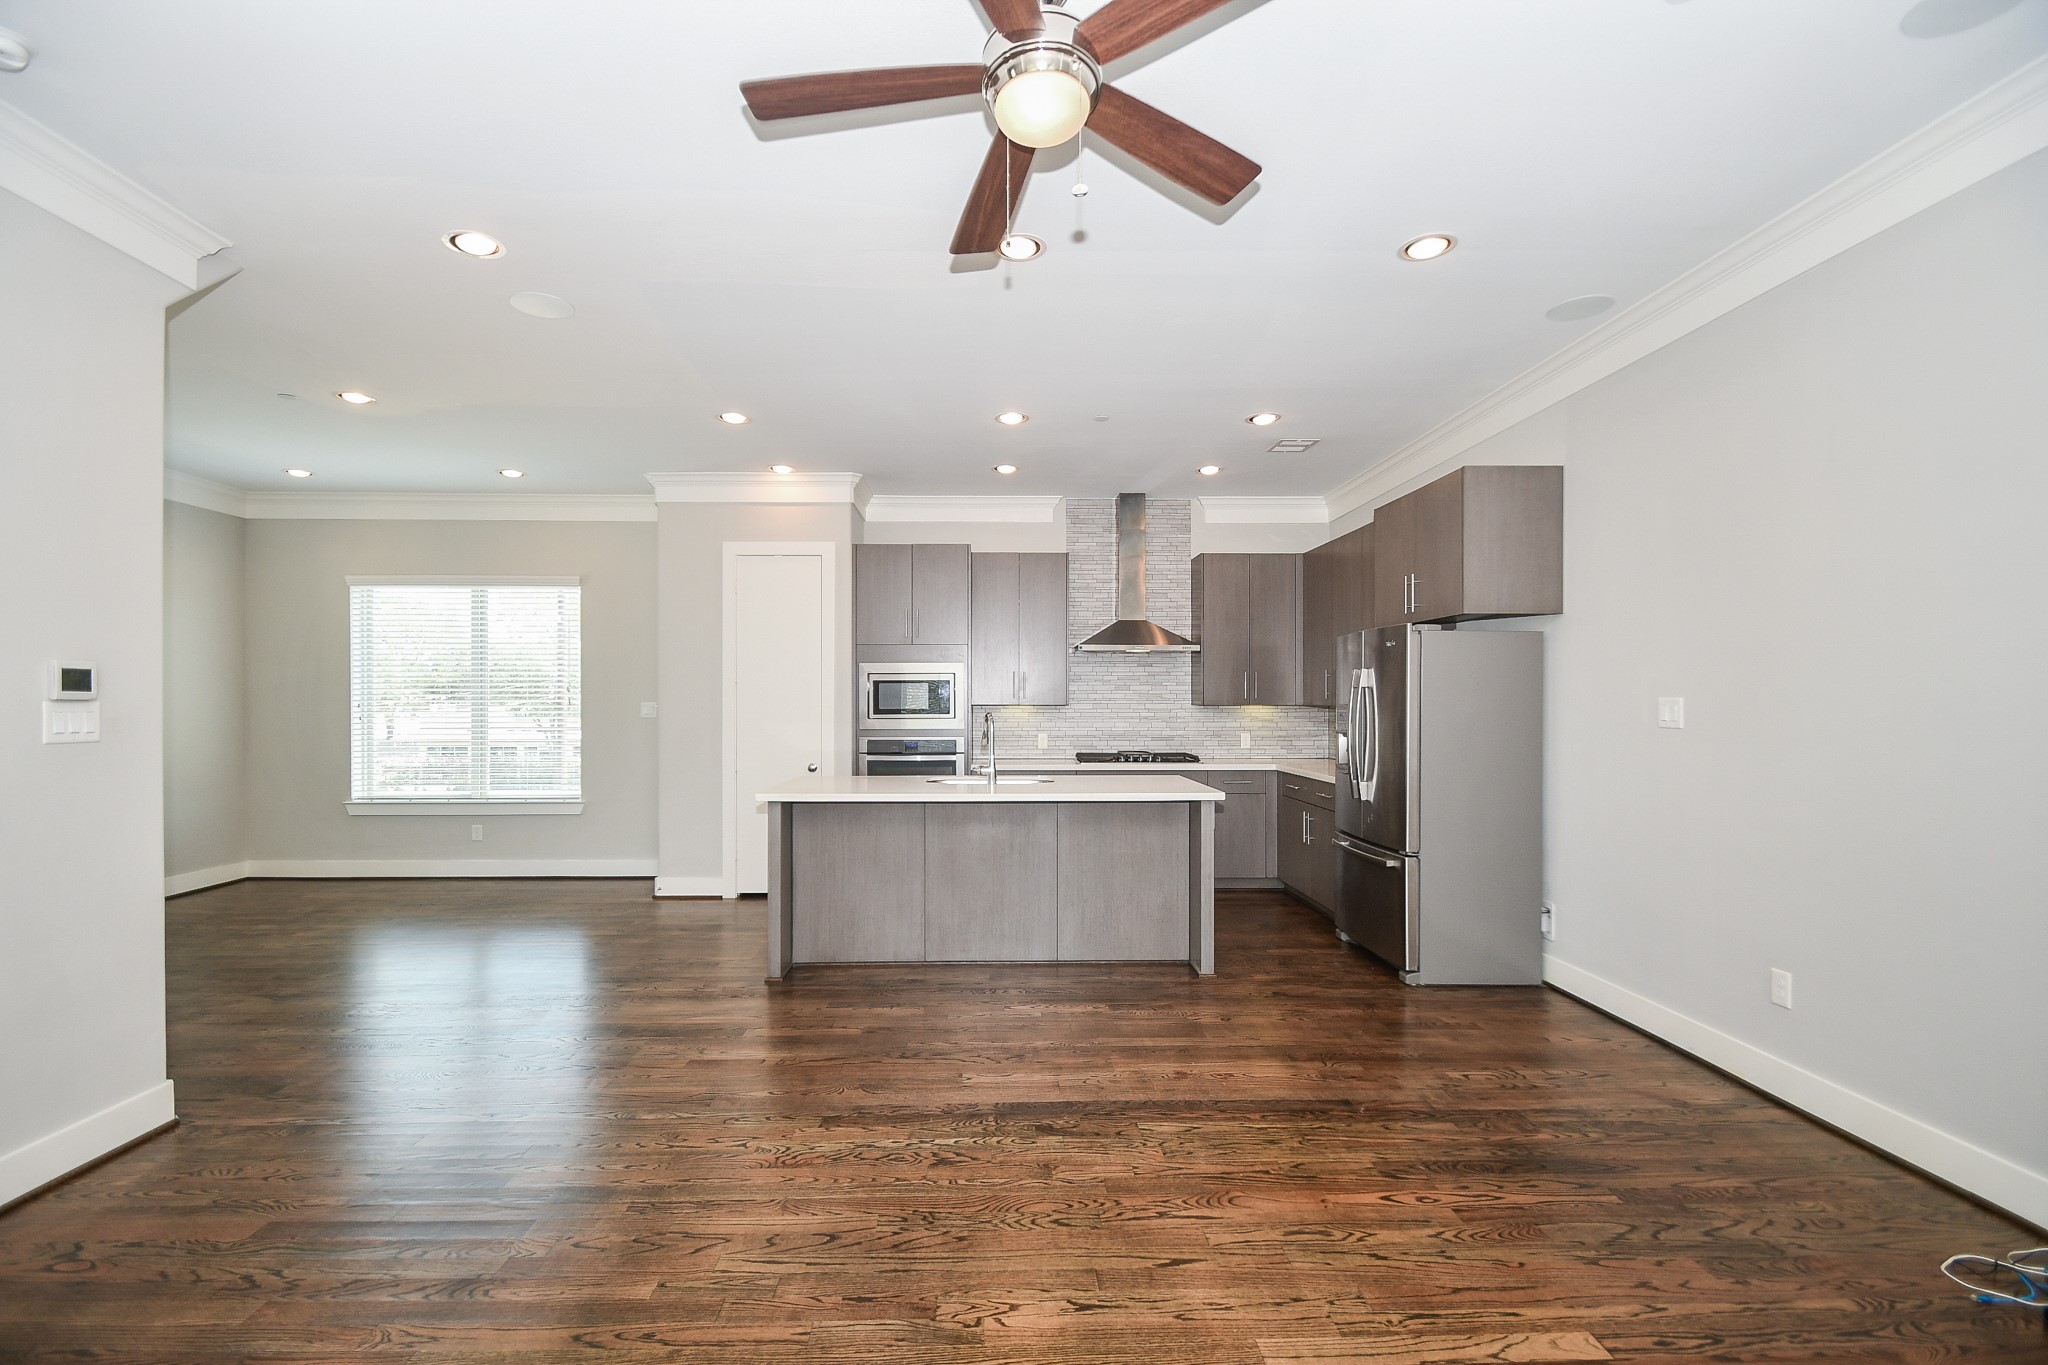 chef's Kitchen boasts Fabulous Finishes with Quartz Counter tops, designer tile backsplash, five-burner gas stove stainless steel appliances and large island for extra prep-space and seating. Separate Micro-Wave and Oven